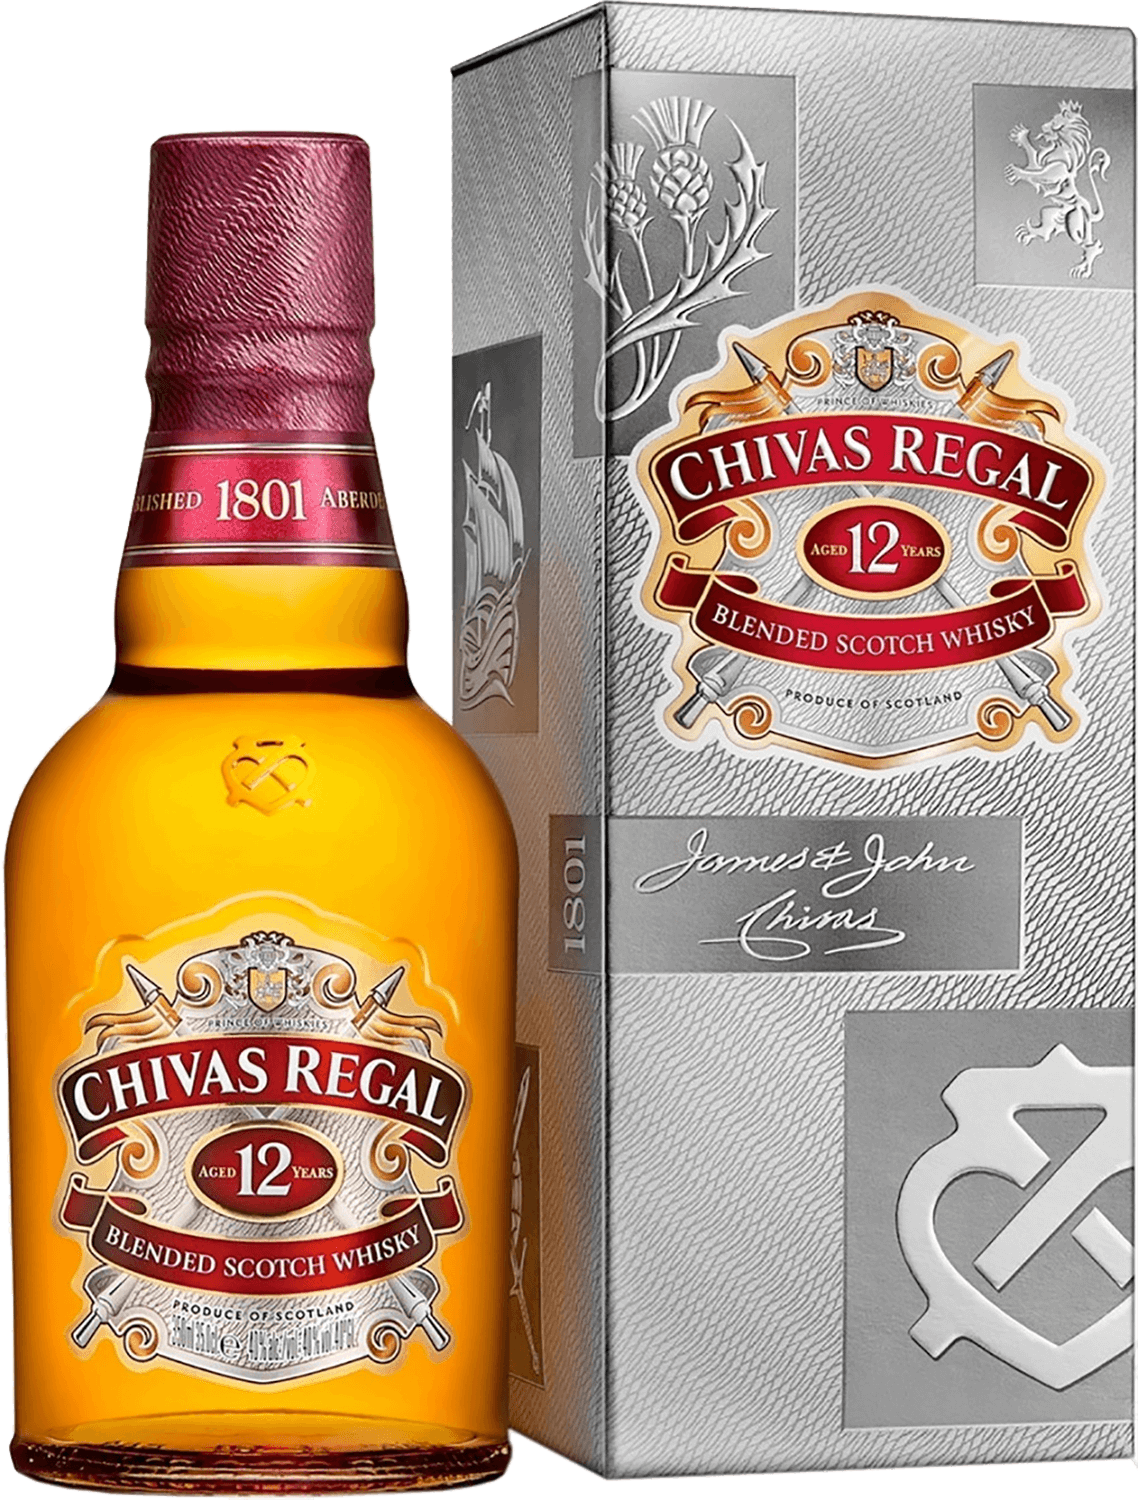 Chivas Regal Blended Scotch Whisky 12 y.o. (gift box) chivas regal blended scotch whisky 25 y o gift box